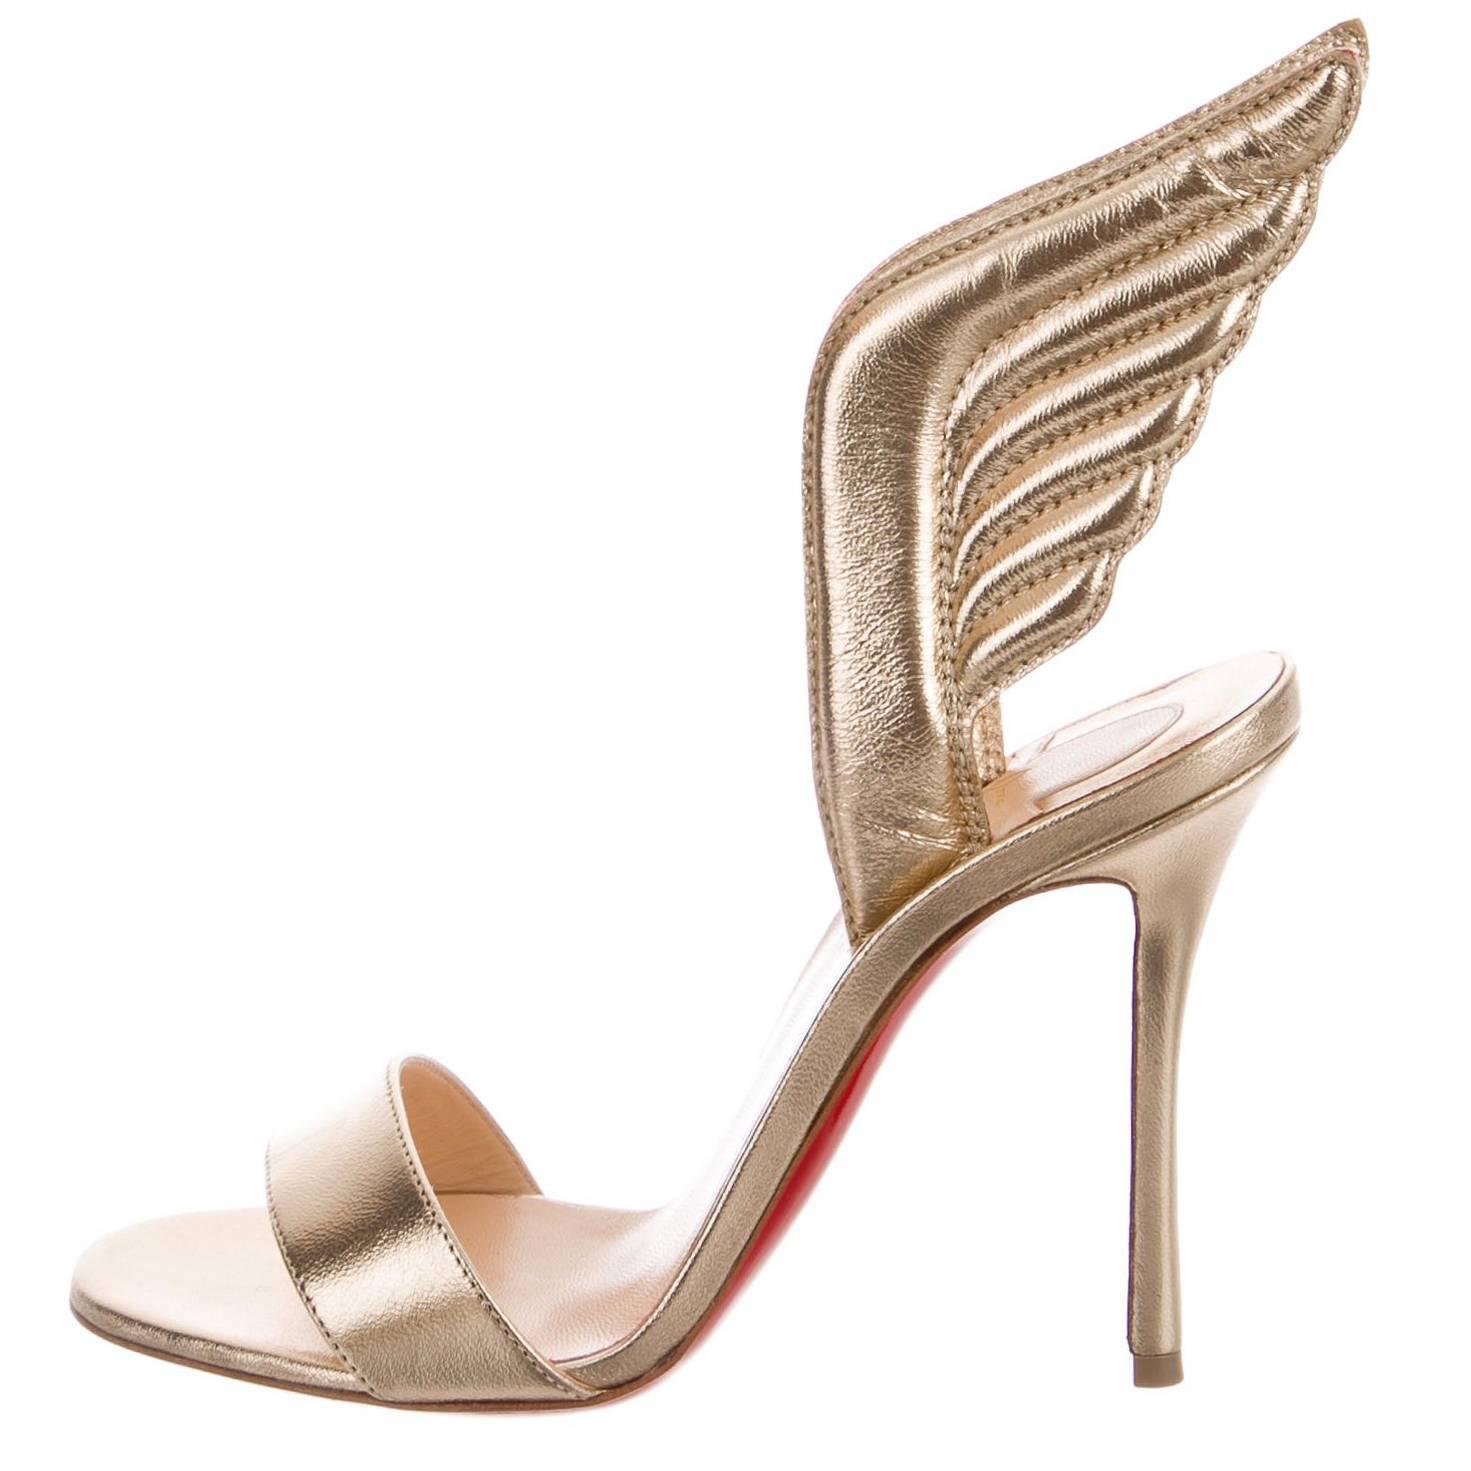 Christian Louboutin NEW & SOLD OUT Gold Leather Futuristic Sandals Heels in Box